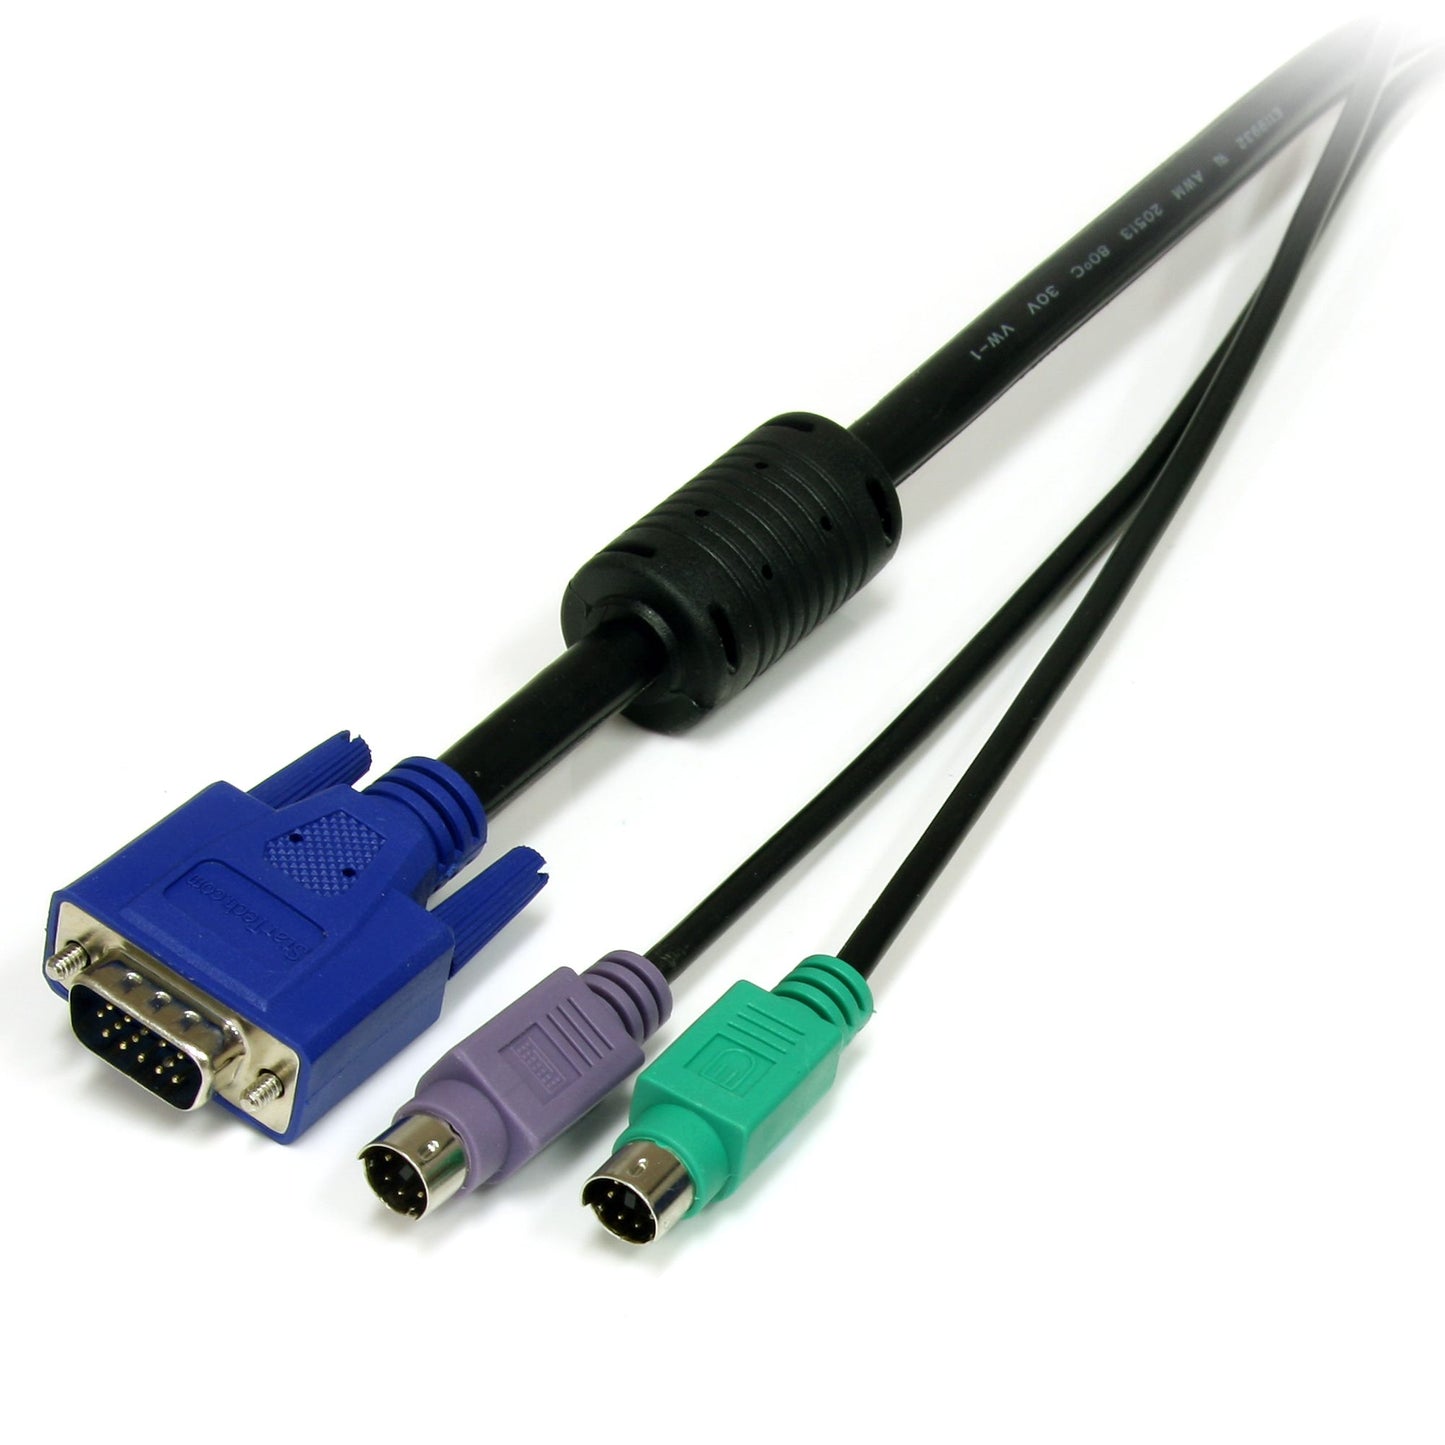 6ft PS/2 Style 3 in 1 KVM Switch Cable